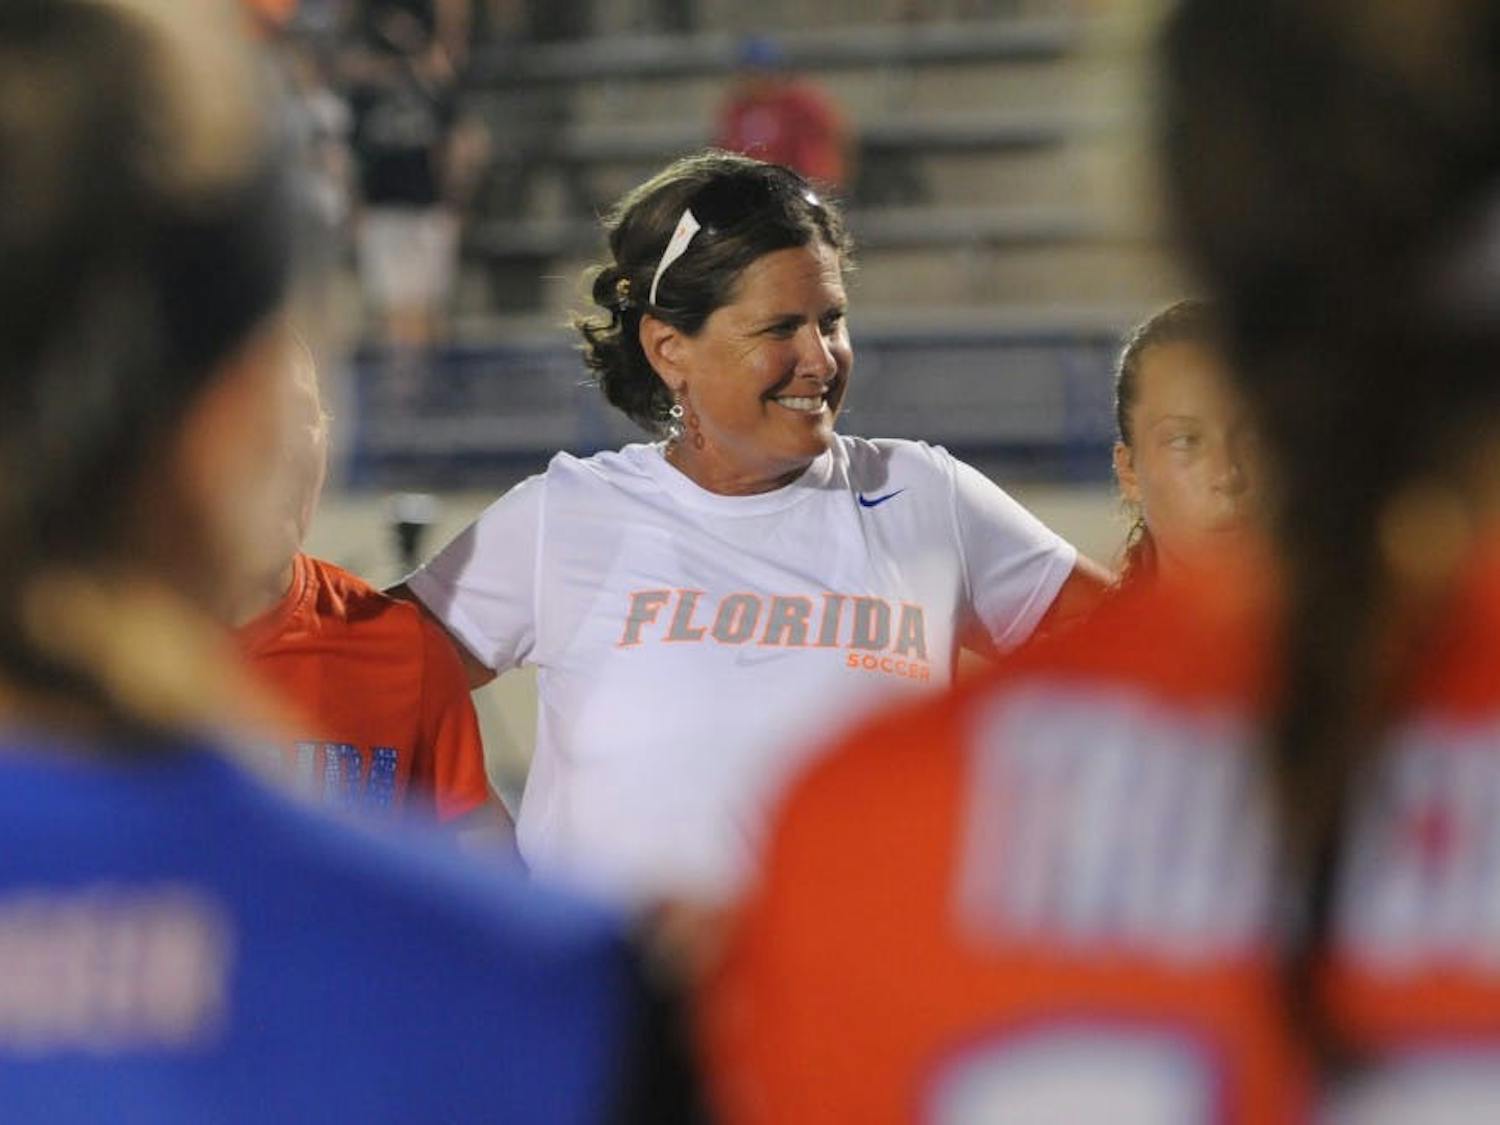 Former longtime Florida head coach Becki Burleigh is expected to take a coaching job with the NWSL's Orlando Pride in her first work beyond the Florida Gators.